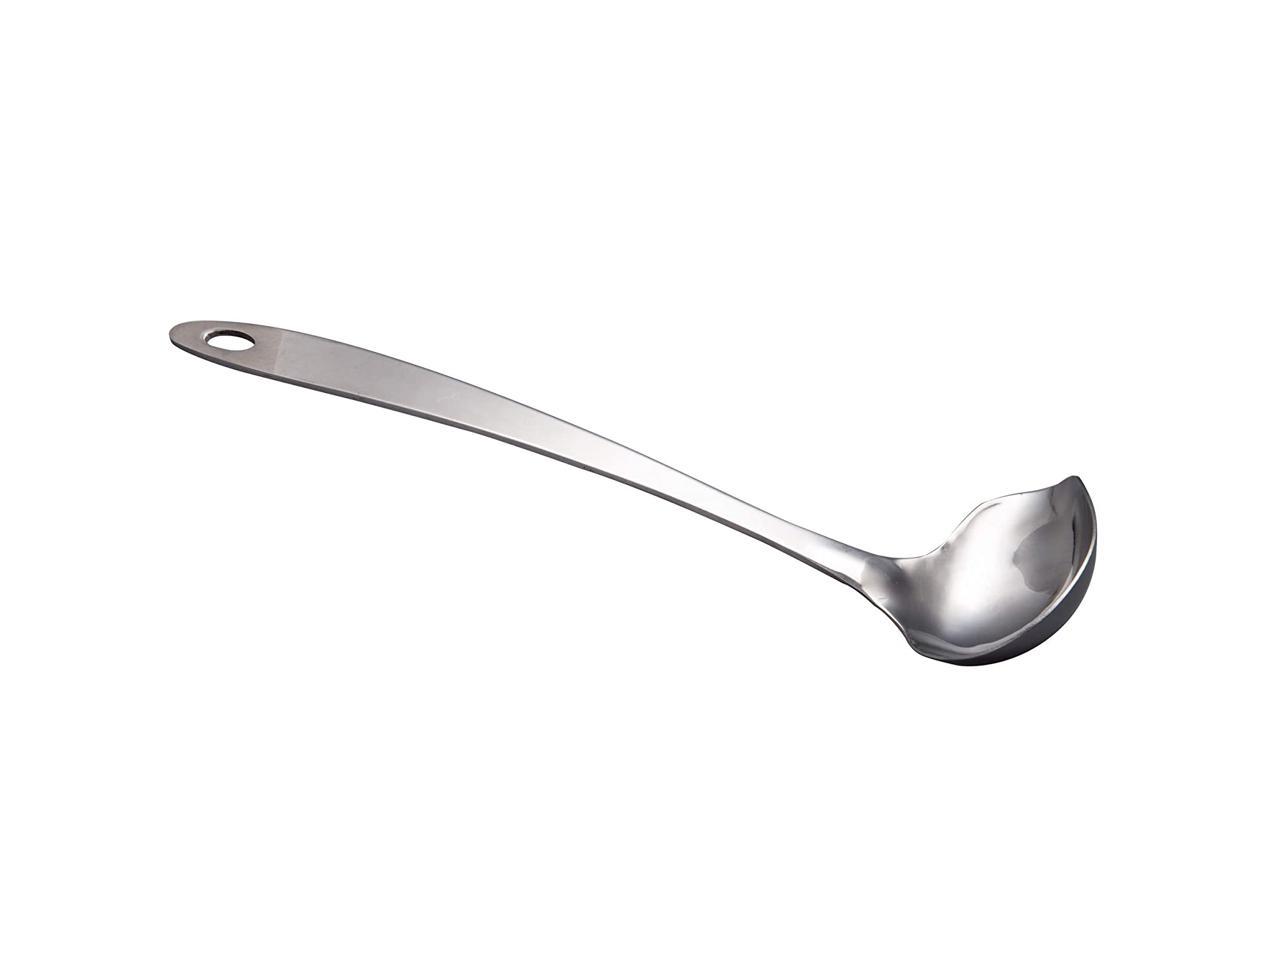 11.6inch IMEEA Gravy Ladle Sauce Drizzle Spoon with Spout Stainless Steel 